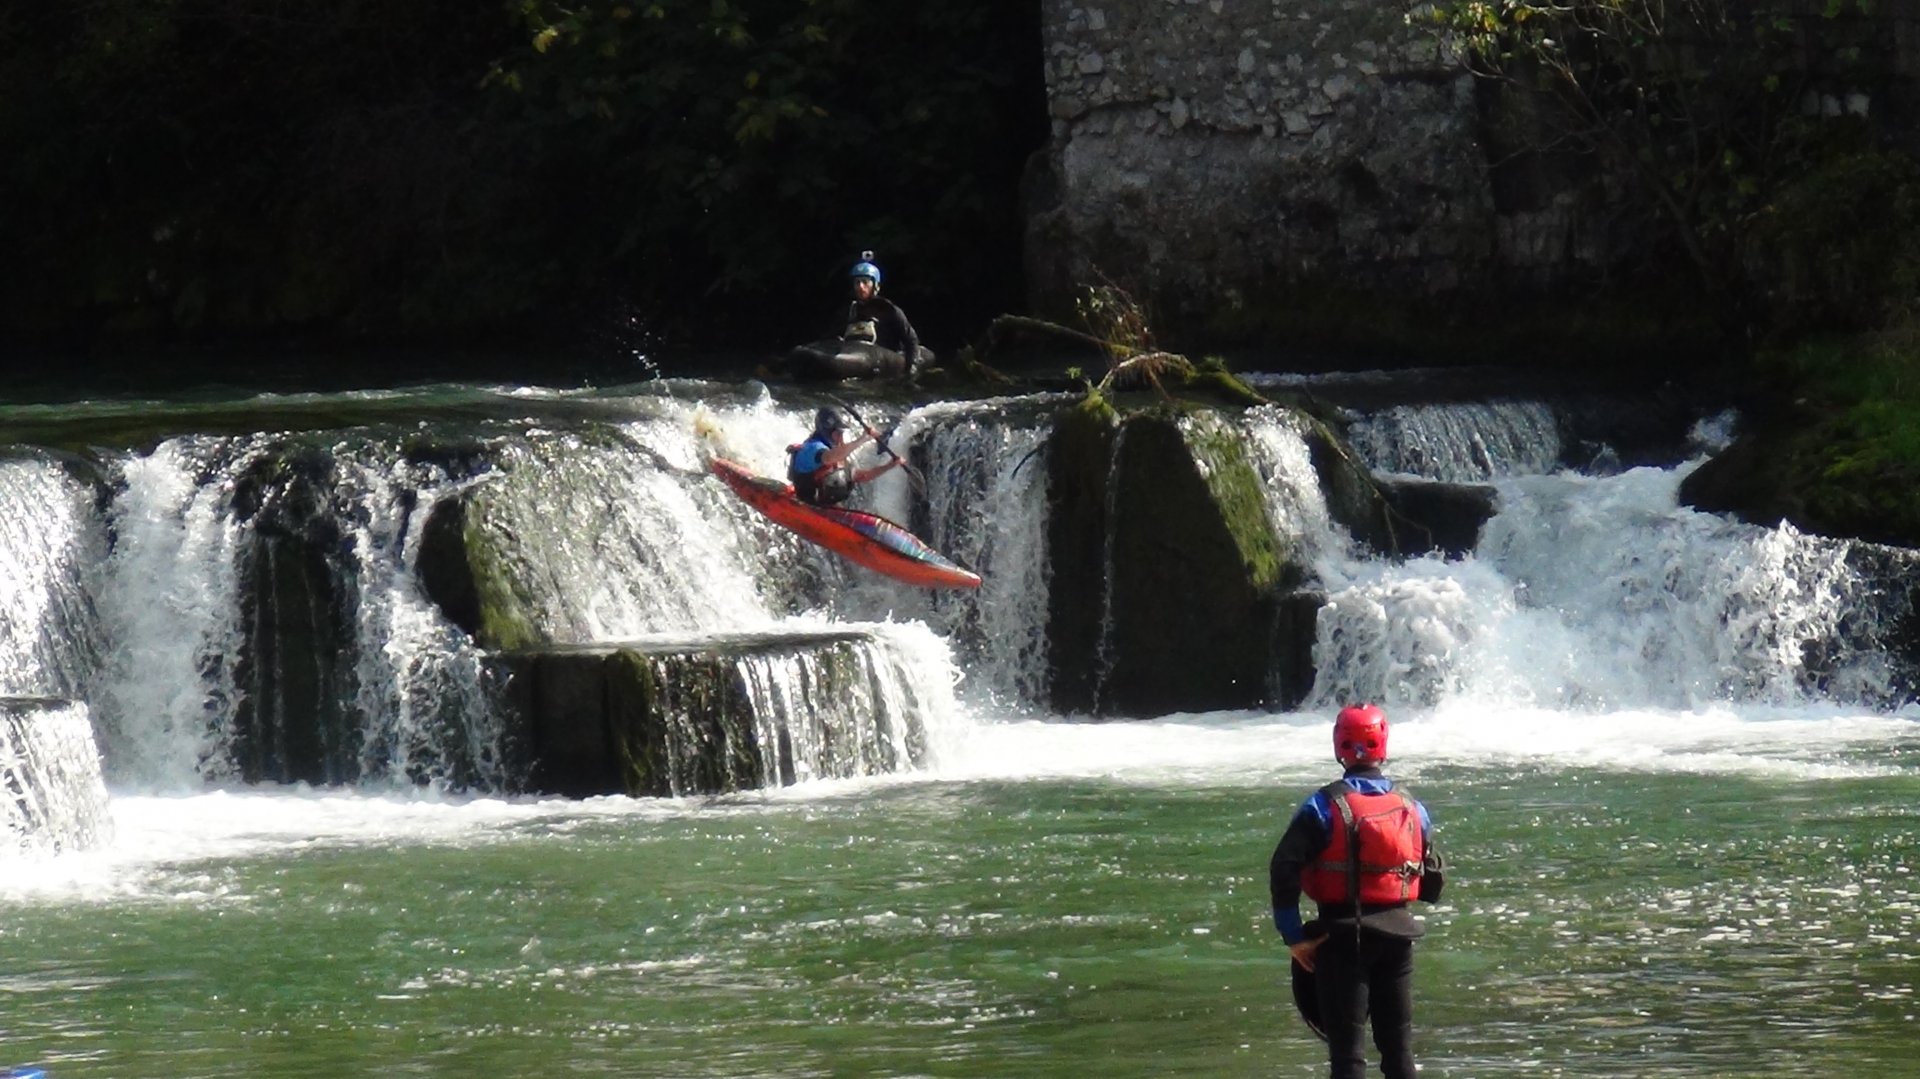 Safety kayak course: first approach or improvement